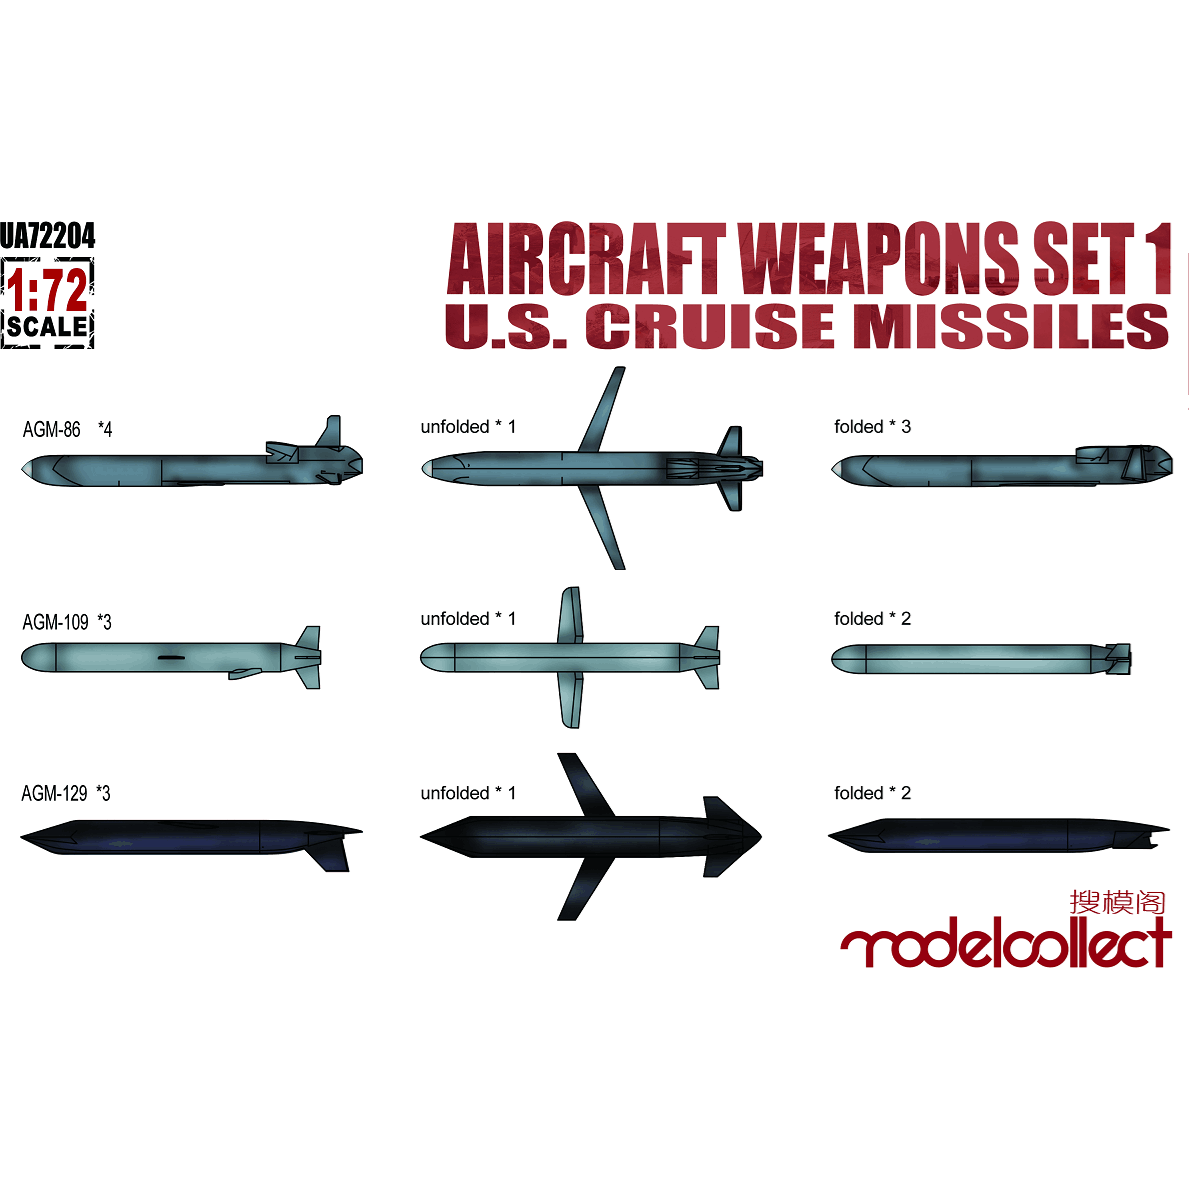 Aircraft Weapons Set 1 U.S. Cruise Missiles 1/72 #UA72204 by ModelCollect